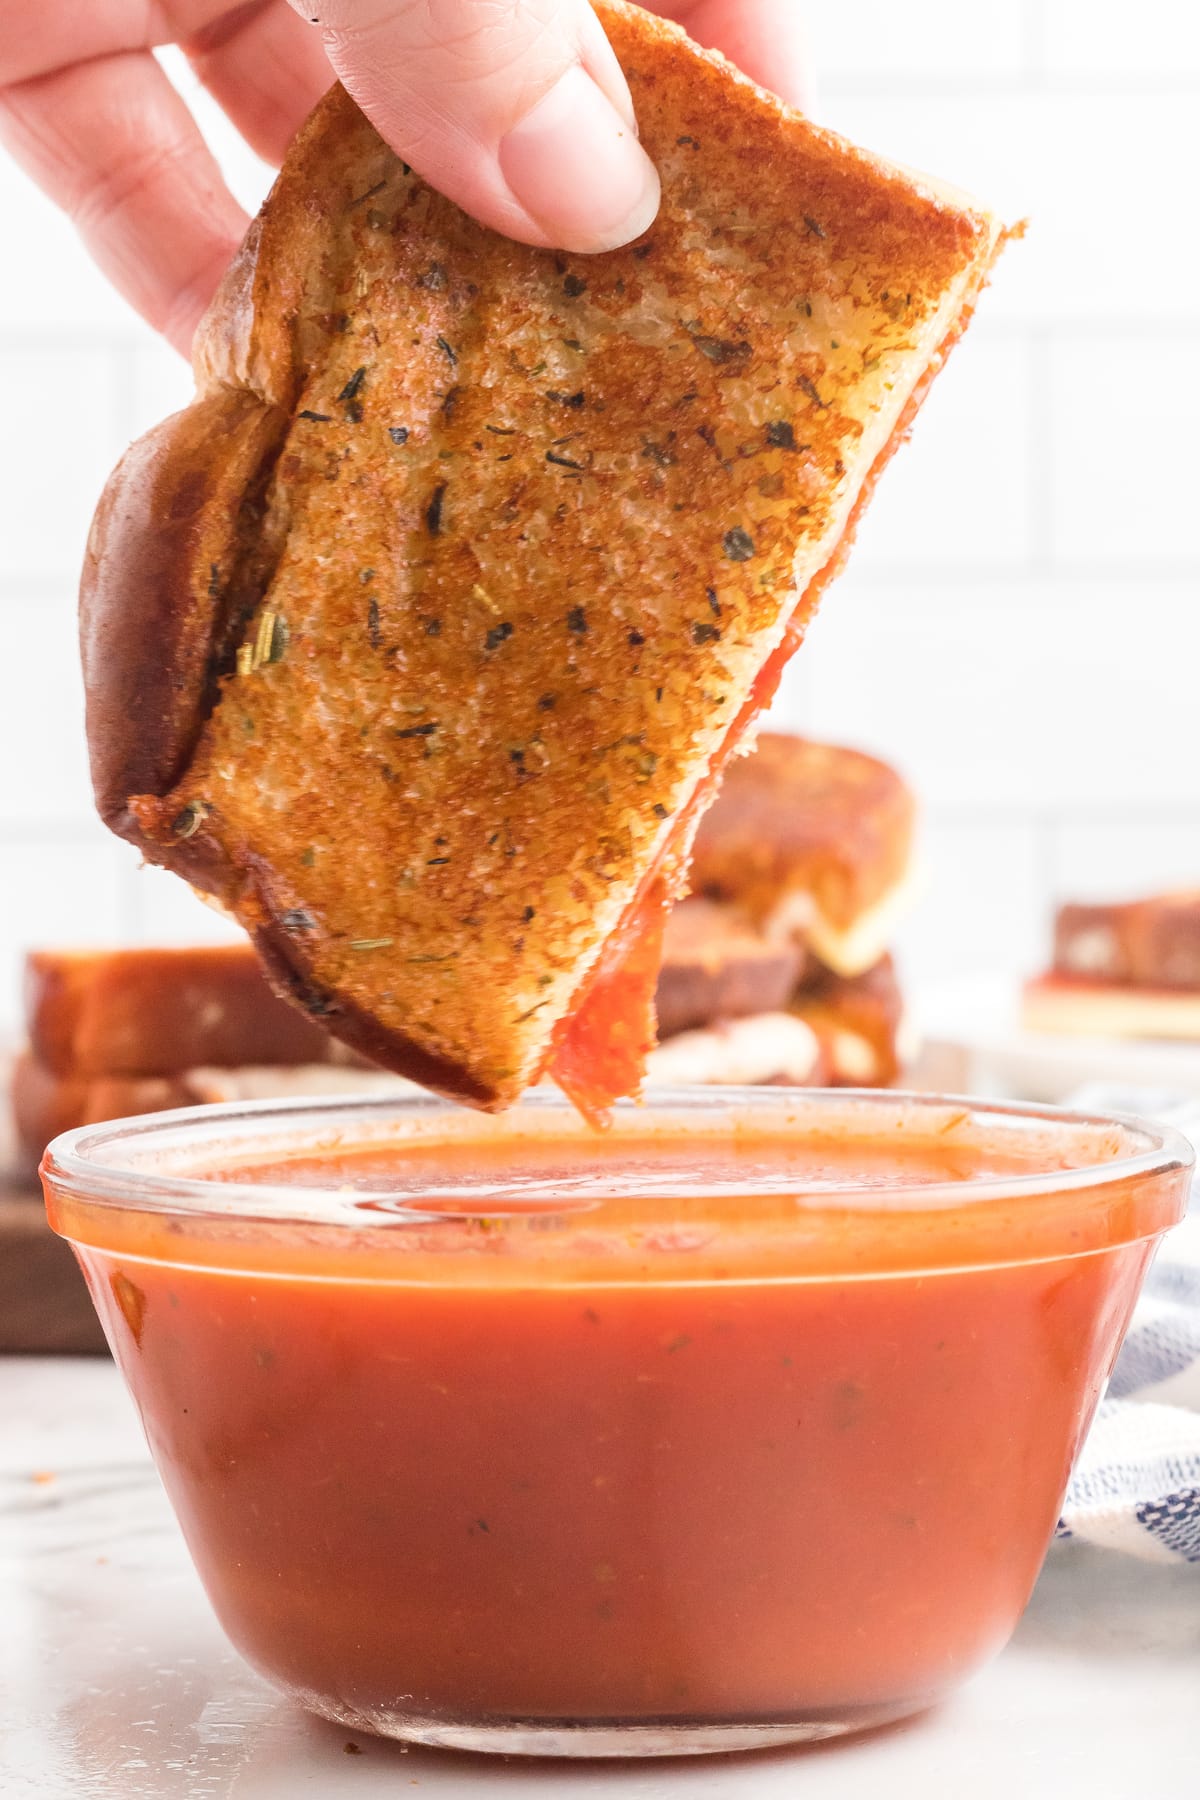 hand dipping pizza grilled cheese into pizza sauce